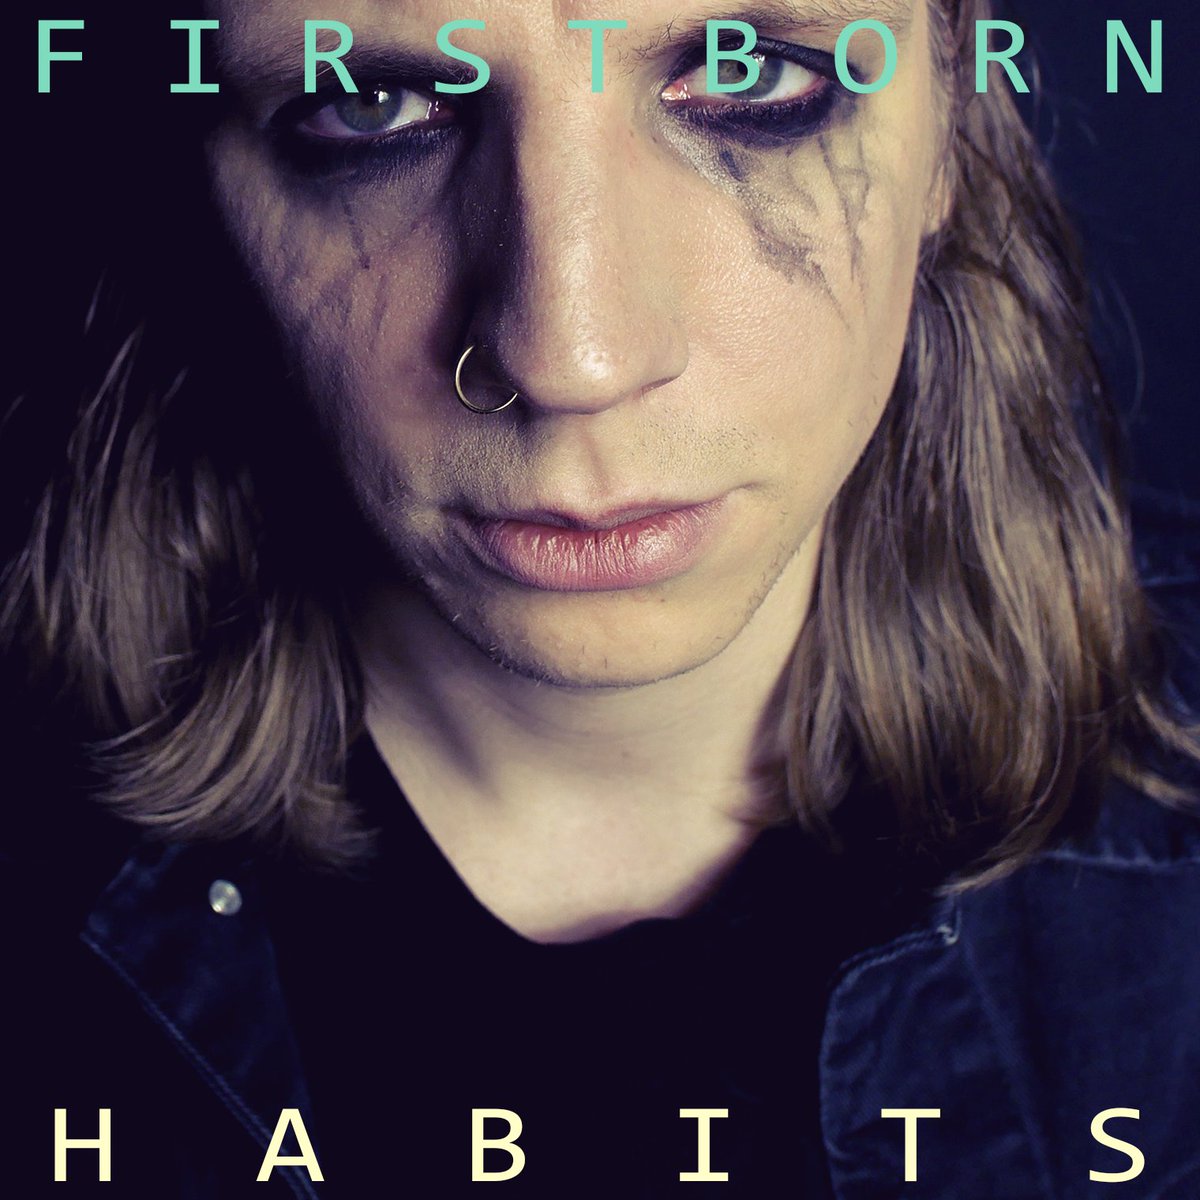 Our version of @ToveLo 's Habits (Stay High) bit.ly/FIRSTBORNHABITS ENJOY! :)